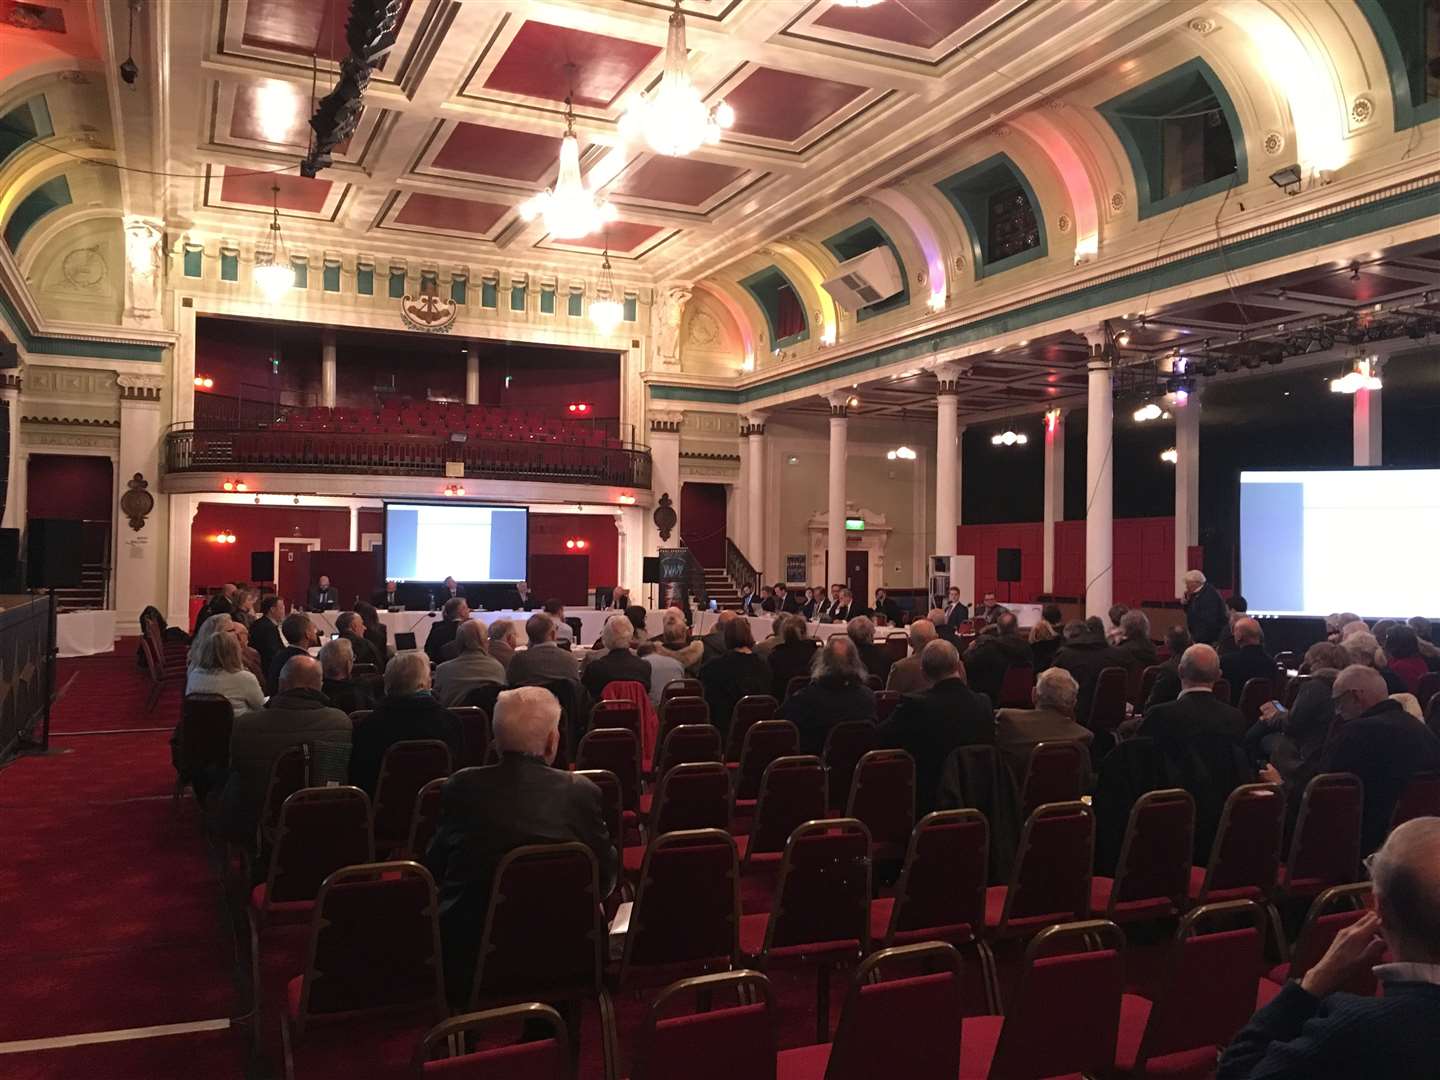 Around 150 people attended the outline hearing setting out the future of Manston Airport on January 9 at the Margate Winter Gardens